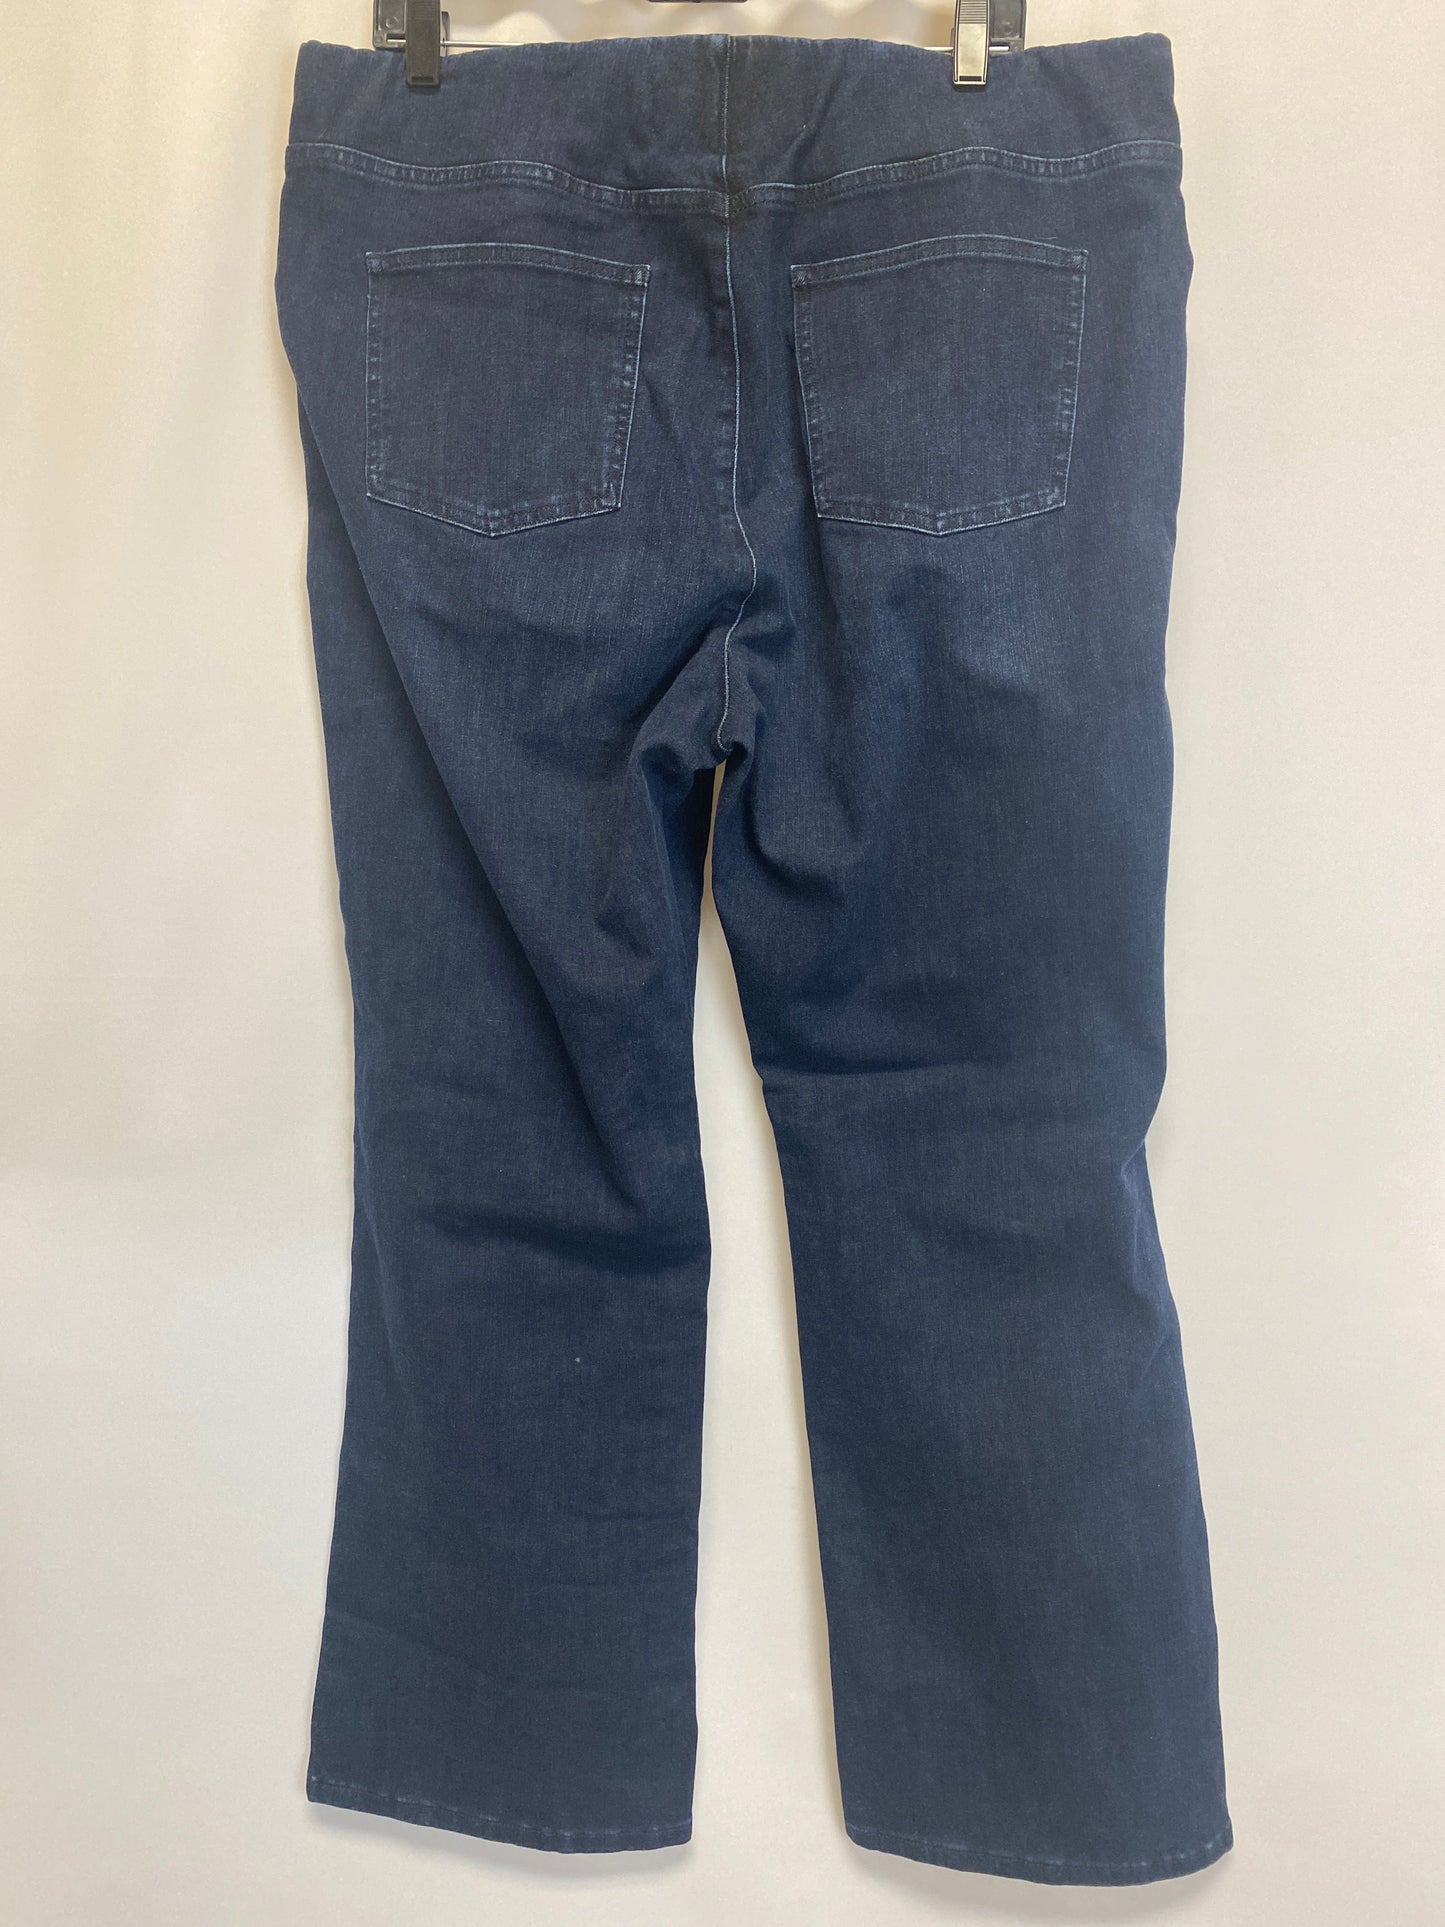 Jeans Straight By Soft Surroundings  Size: 1x